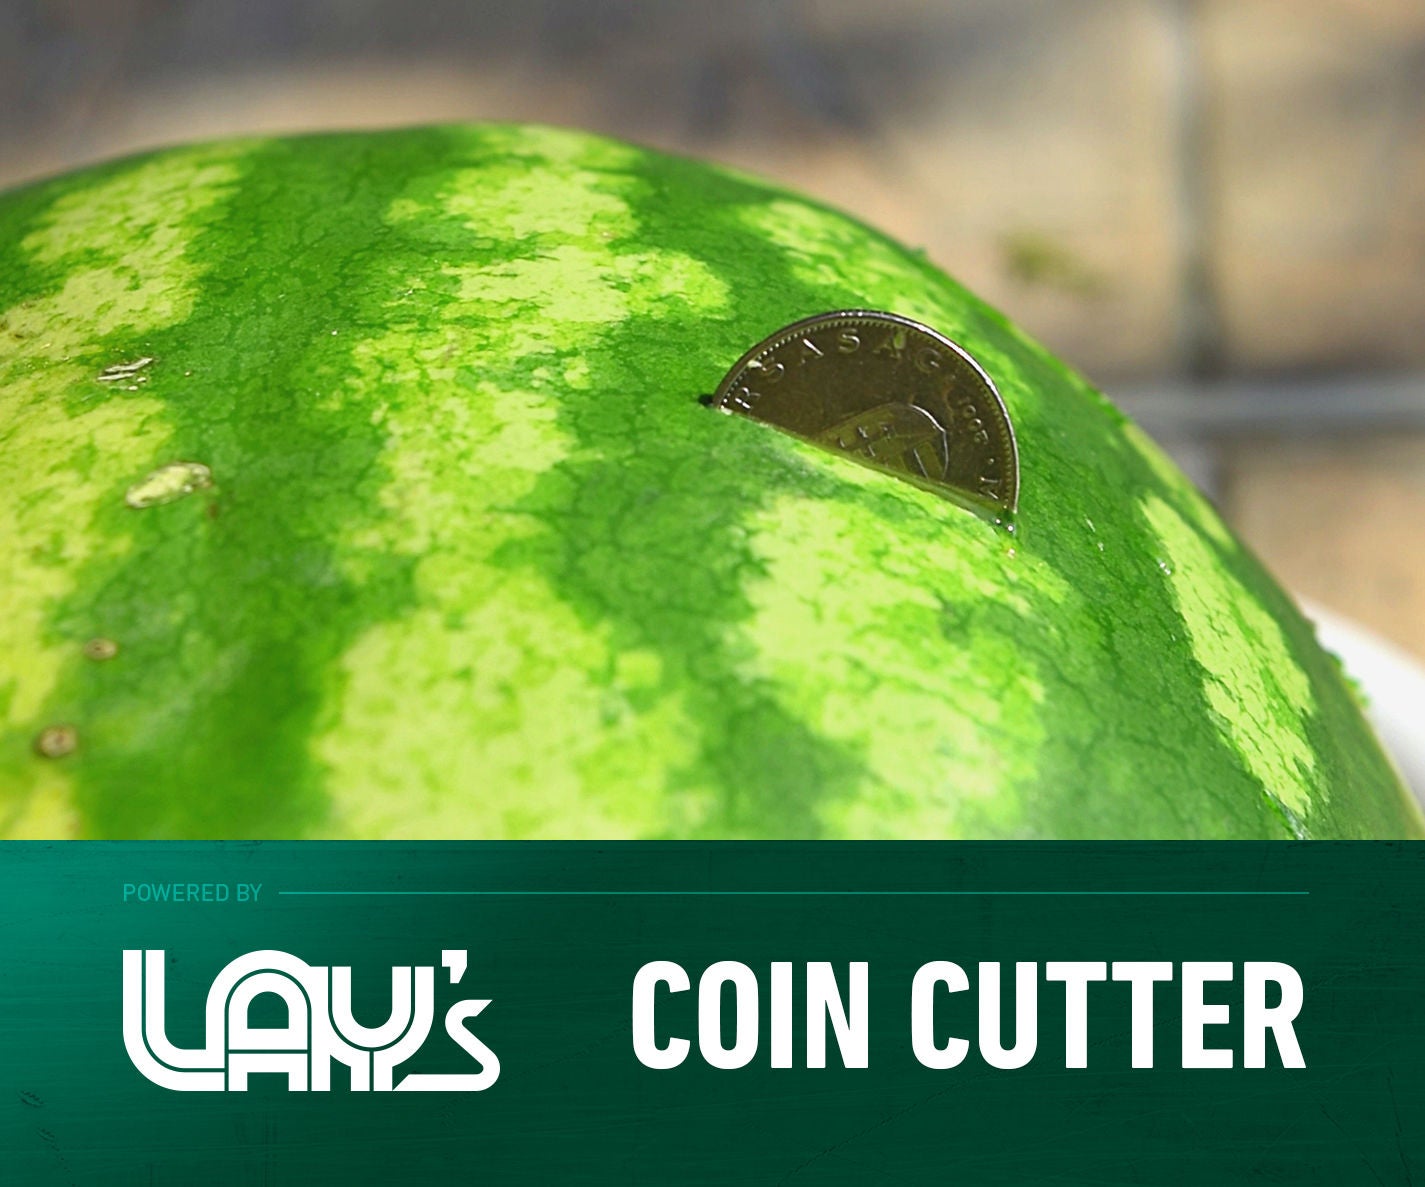 How to Cut a Watermelon Into Half With a Coin : 5 Steps (with Pictures) - Instructables